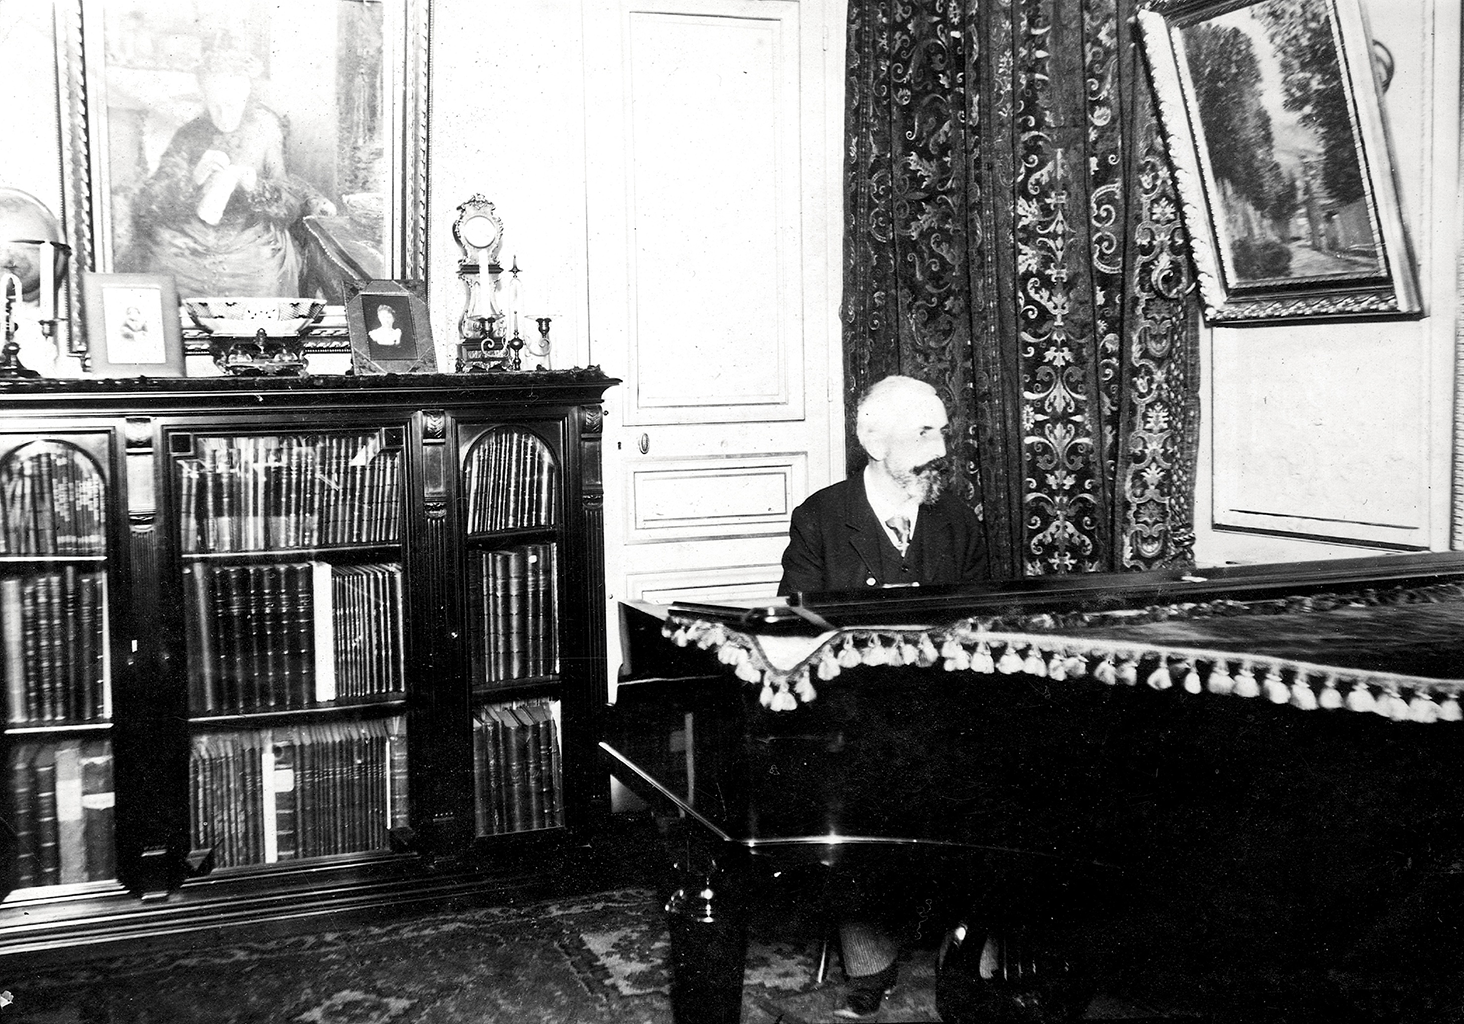 A black and white photograph of a man sitting behind a large piano. To his right is a long bookshelf with a framed painting above it.